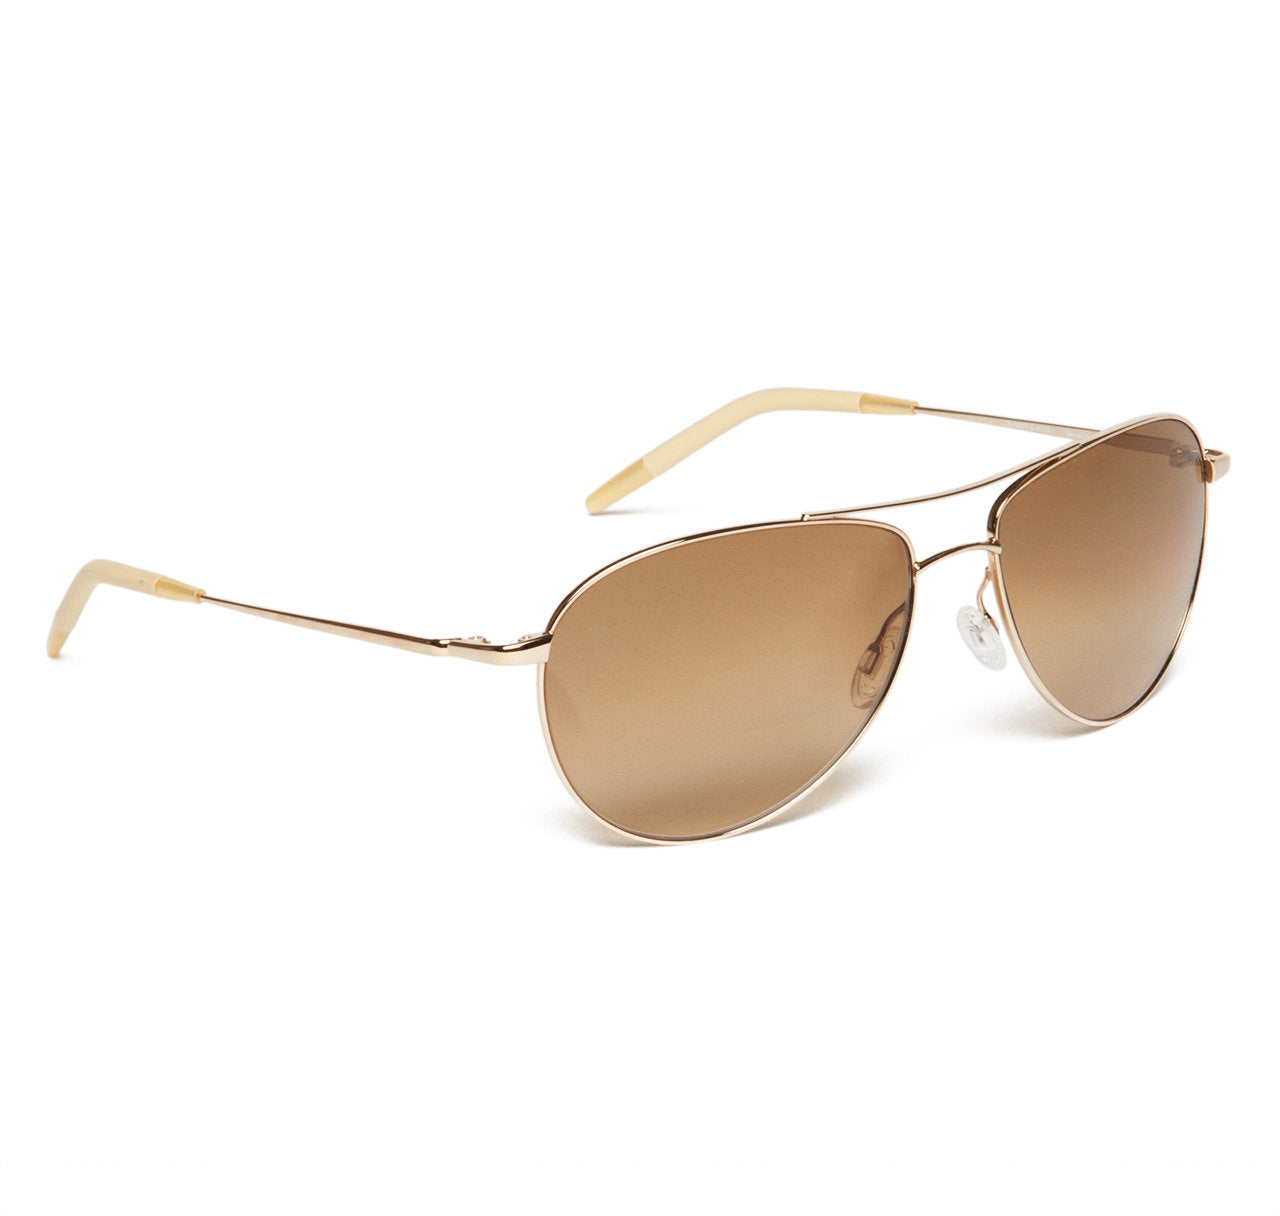 Oliver Peoples Benedict 59 Gold with Amber Chrome Photochromic Glass